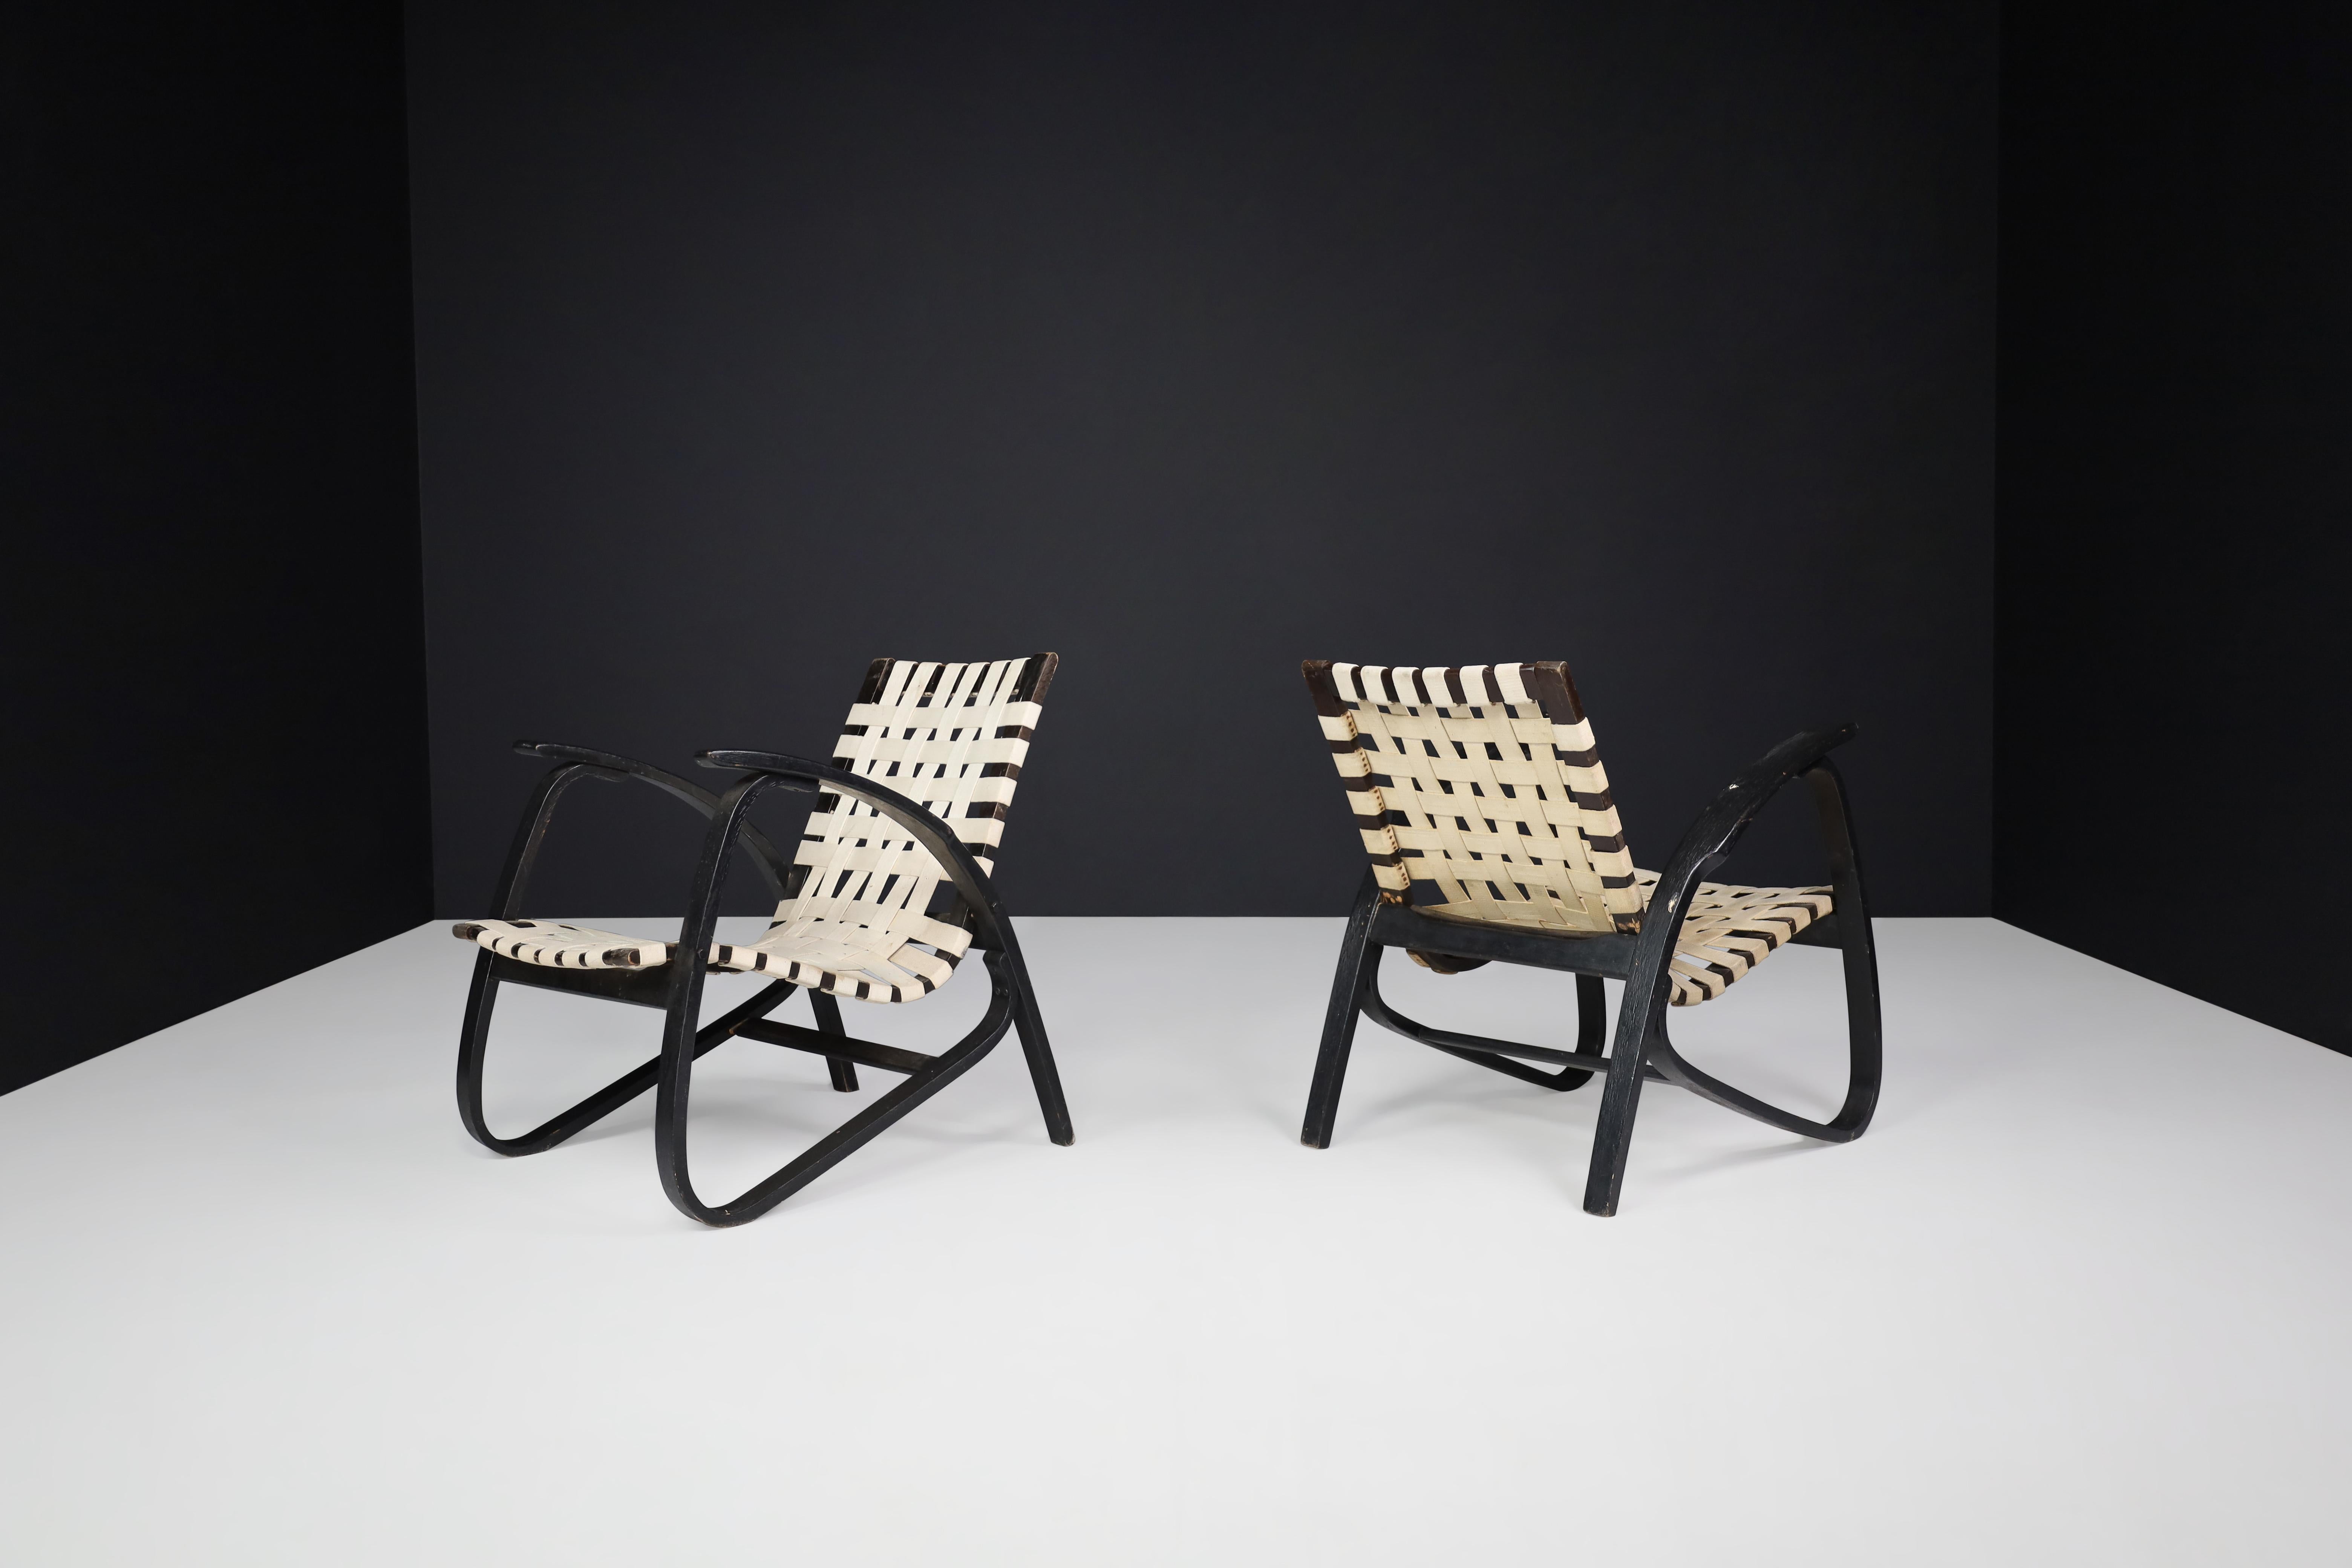 Jan Vanek pair of easy chairs in bentwood and patinated canvas, Praque, 1940s

Pair of elegant easy designed by Czech architect Jan Vanek in the 1940s, who was a contemporary of Jindrich Halabala. These chairs are upholstered with a patinated